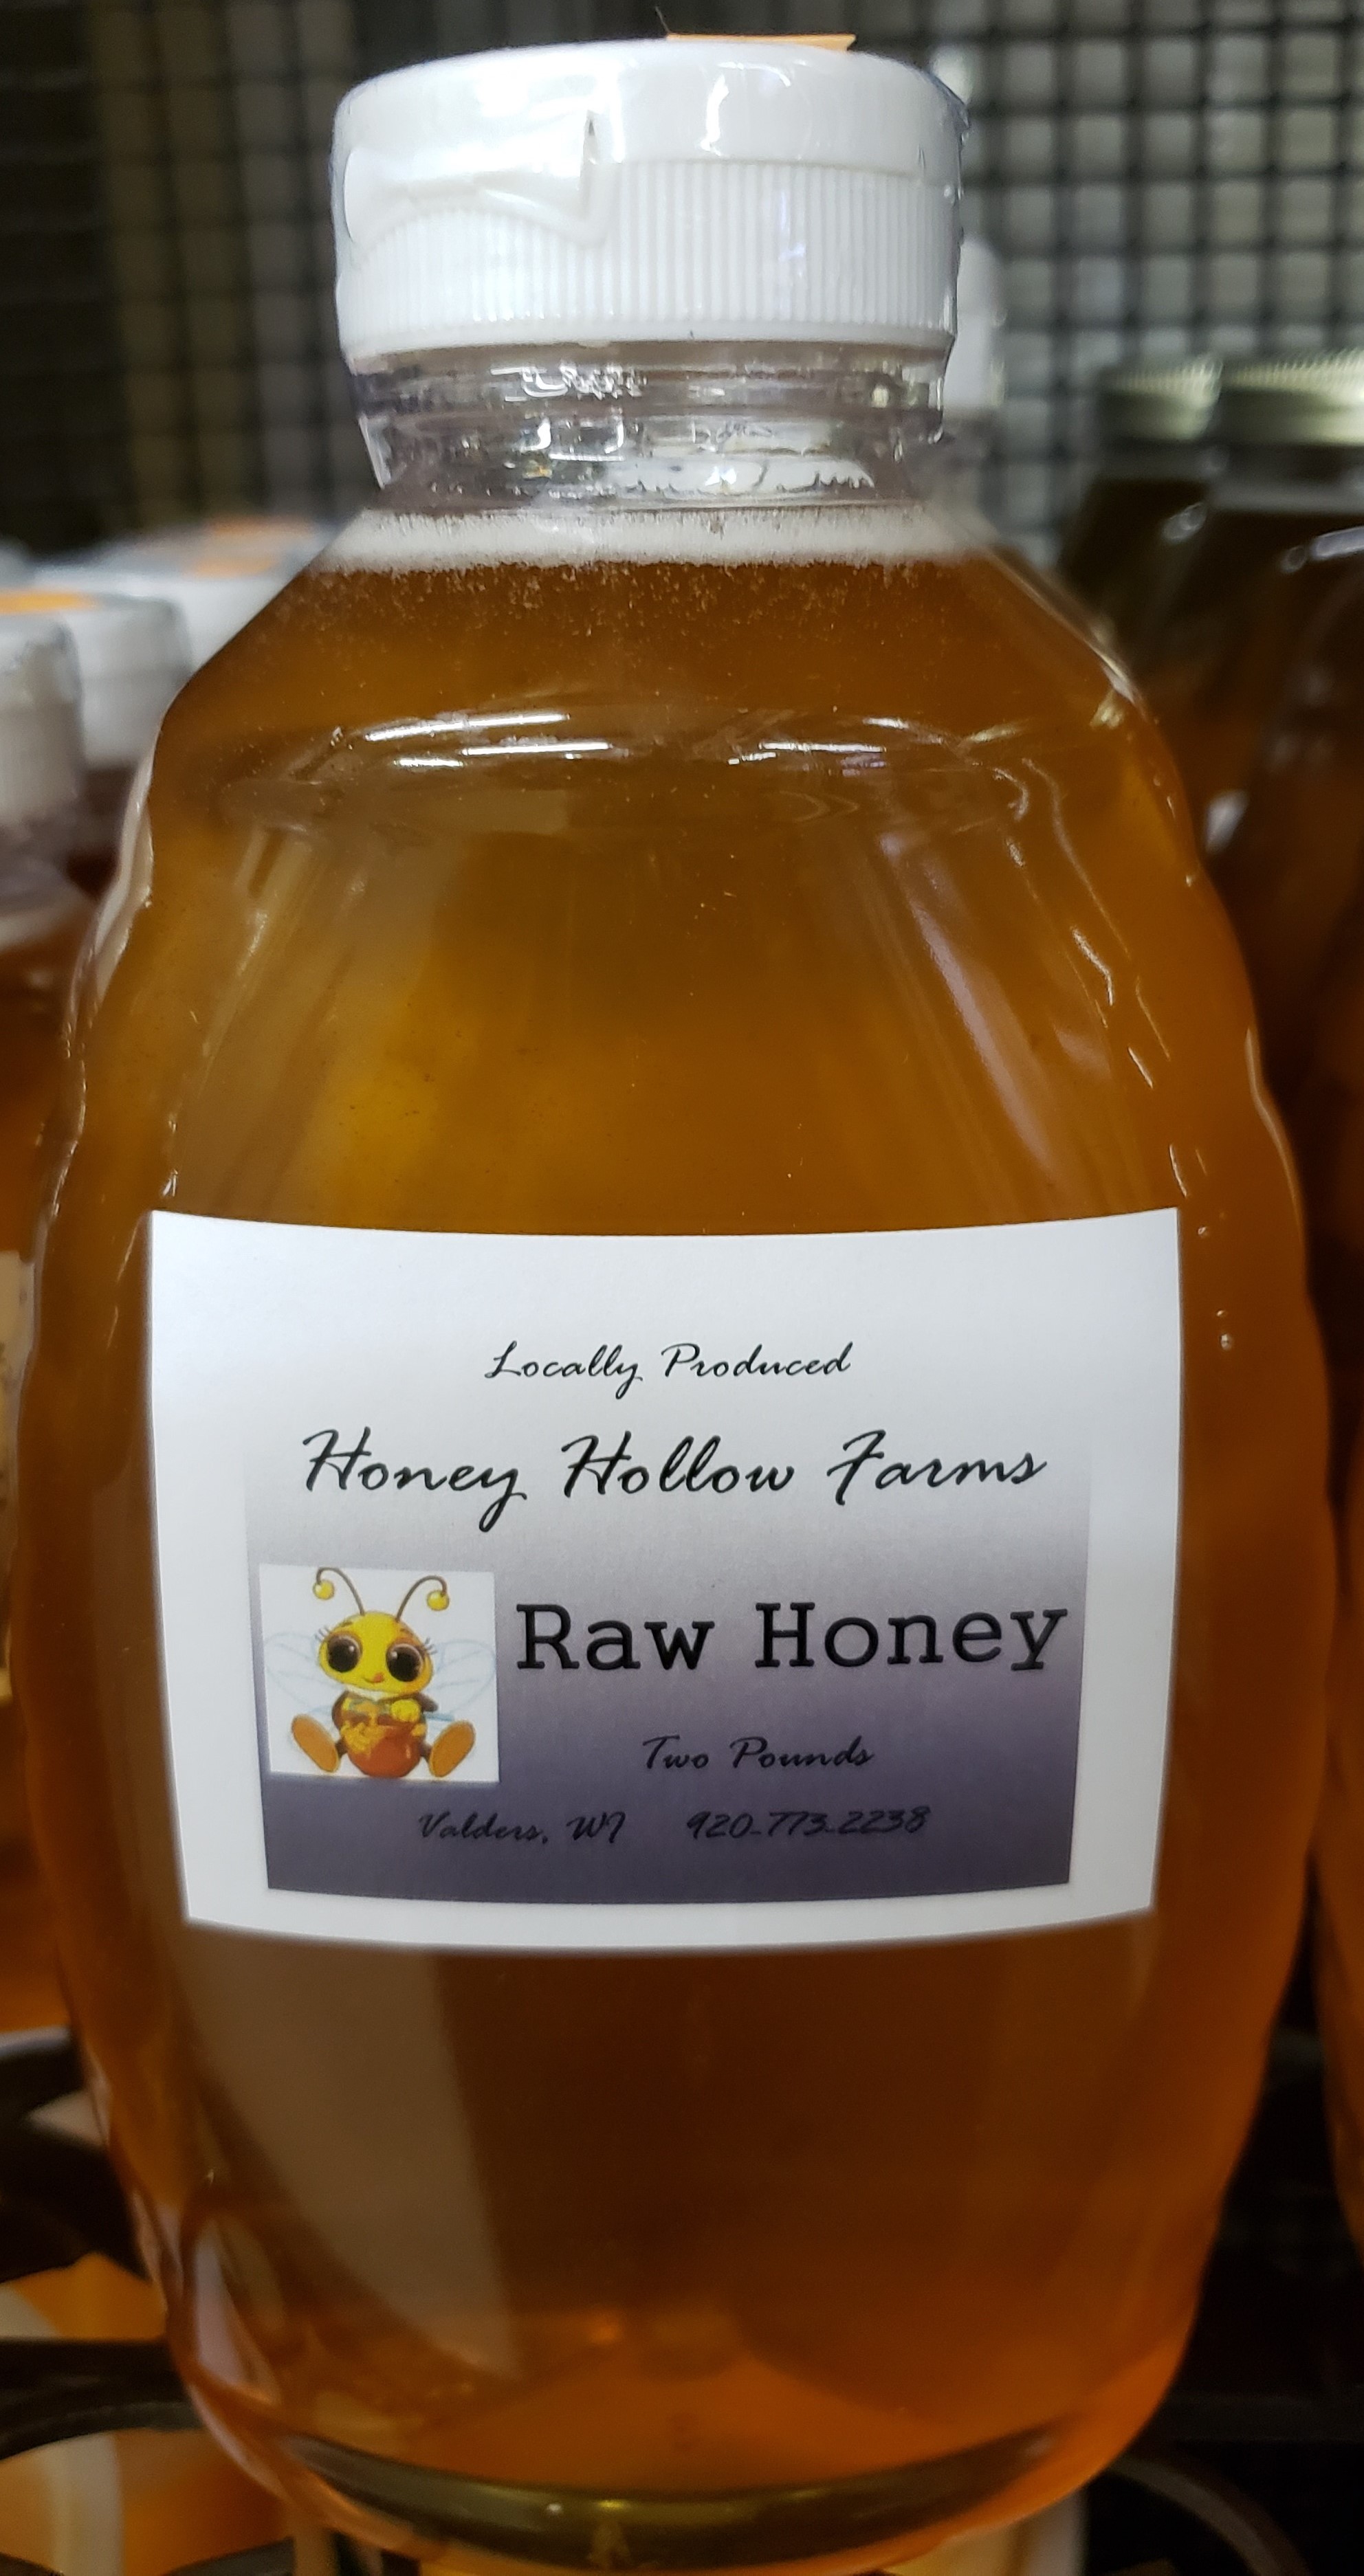 Honey Hollow Farms Local Honey - 2 Pound (Pickup Item Only)